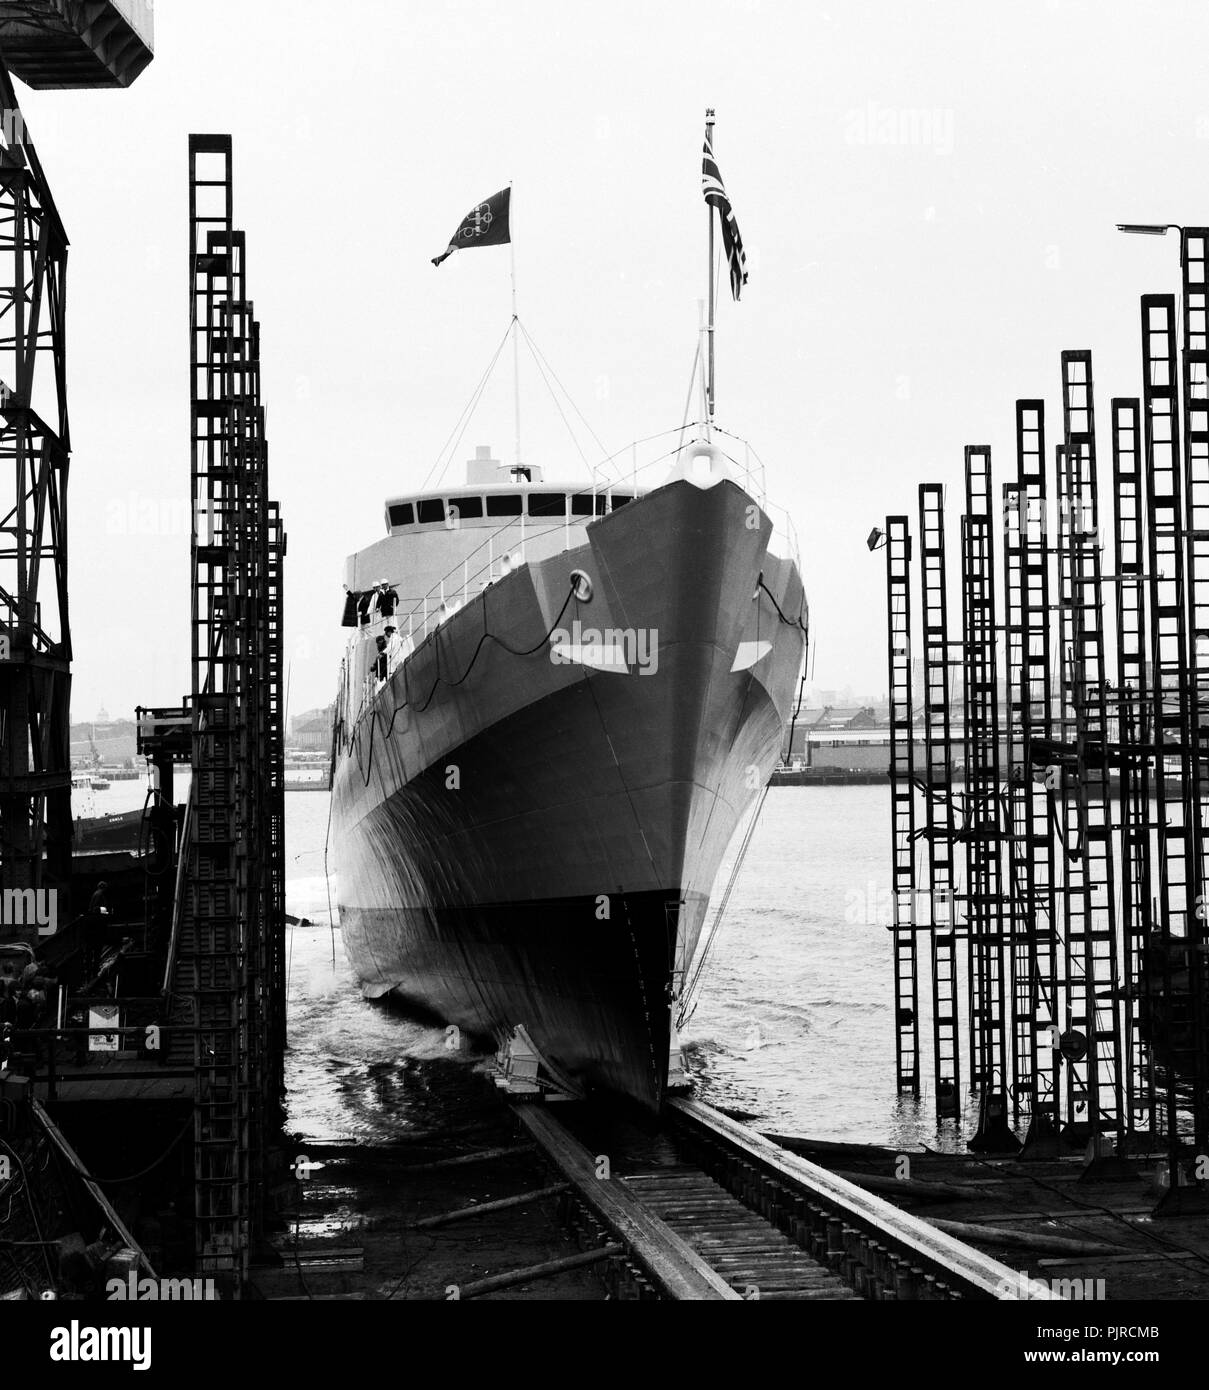 AJAXNETPHOTO. 1968. WOOLSTON,ENGLAND. - NEW FRIGATE LAUNCHED - HMS AMAZON SLIPS DOWN THE LAUNCH WAYS ON THE ITCHEN RIVER. PHOTO:VT COLLECTION/AJXNETPHOTO REF:HDD NA VT AMAZON LAUNCH 1967 Stock Photo